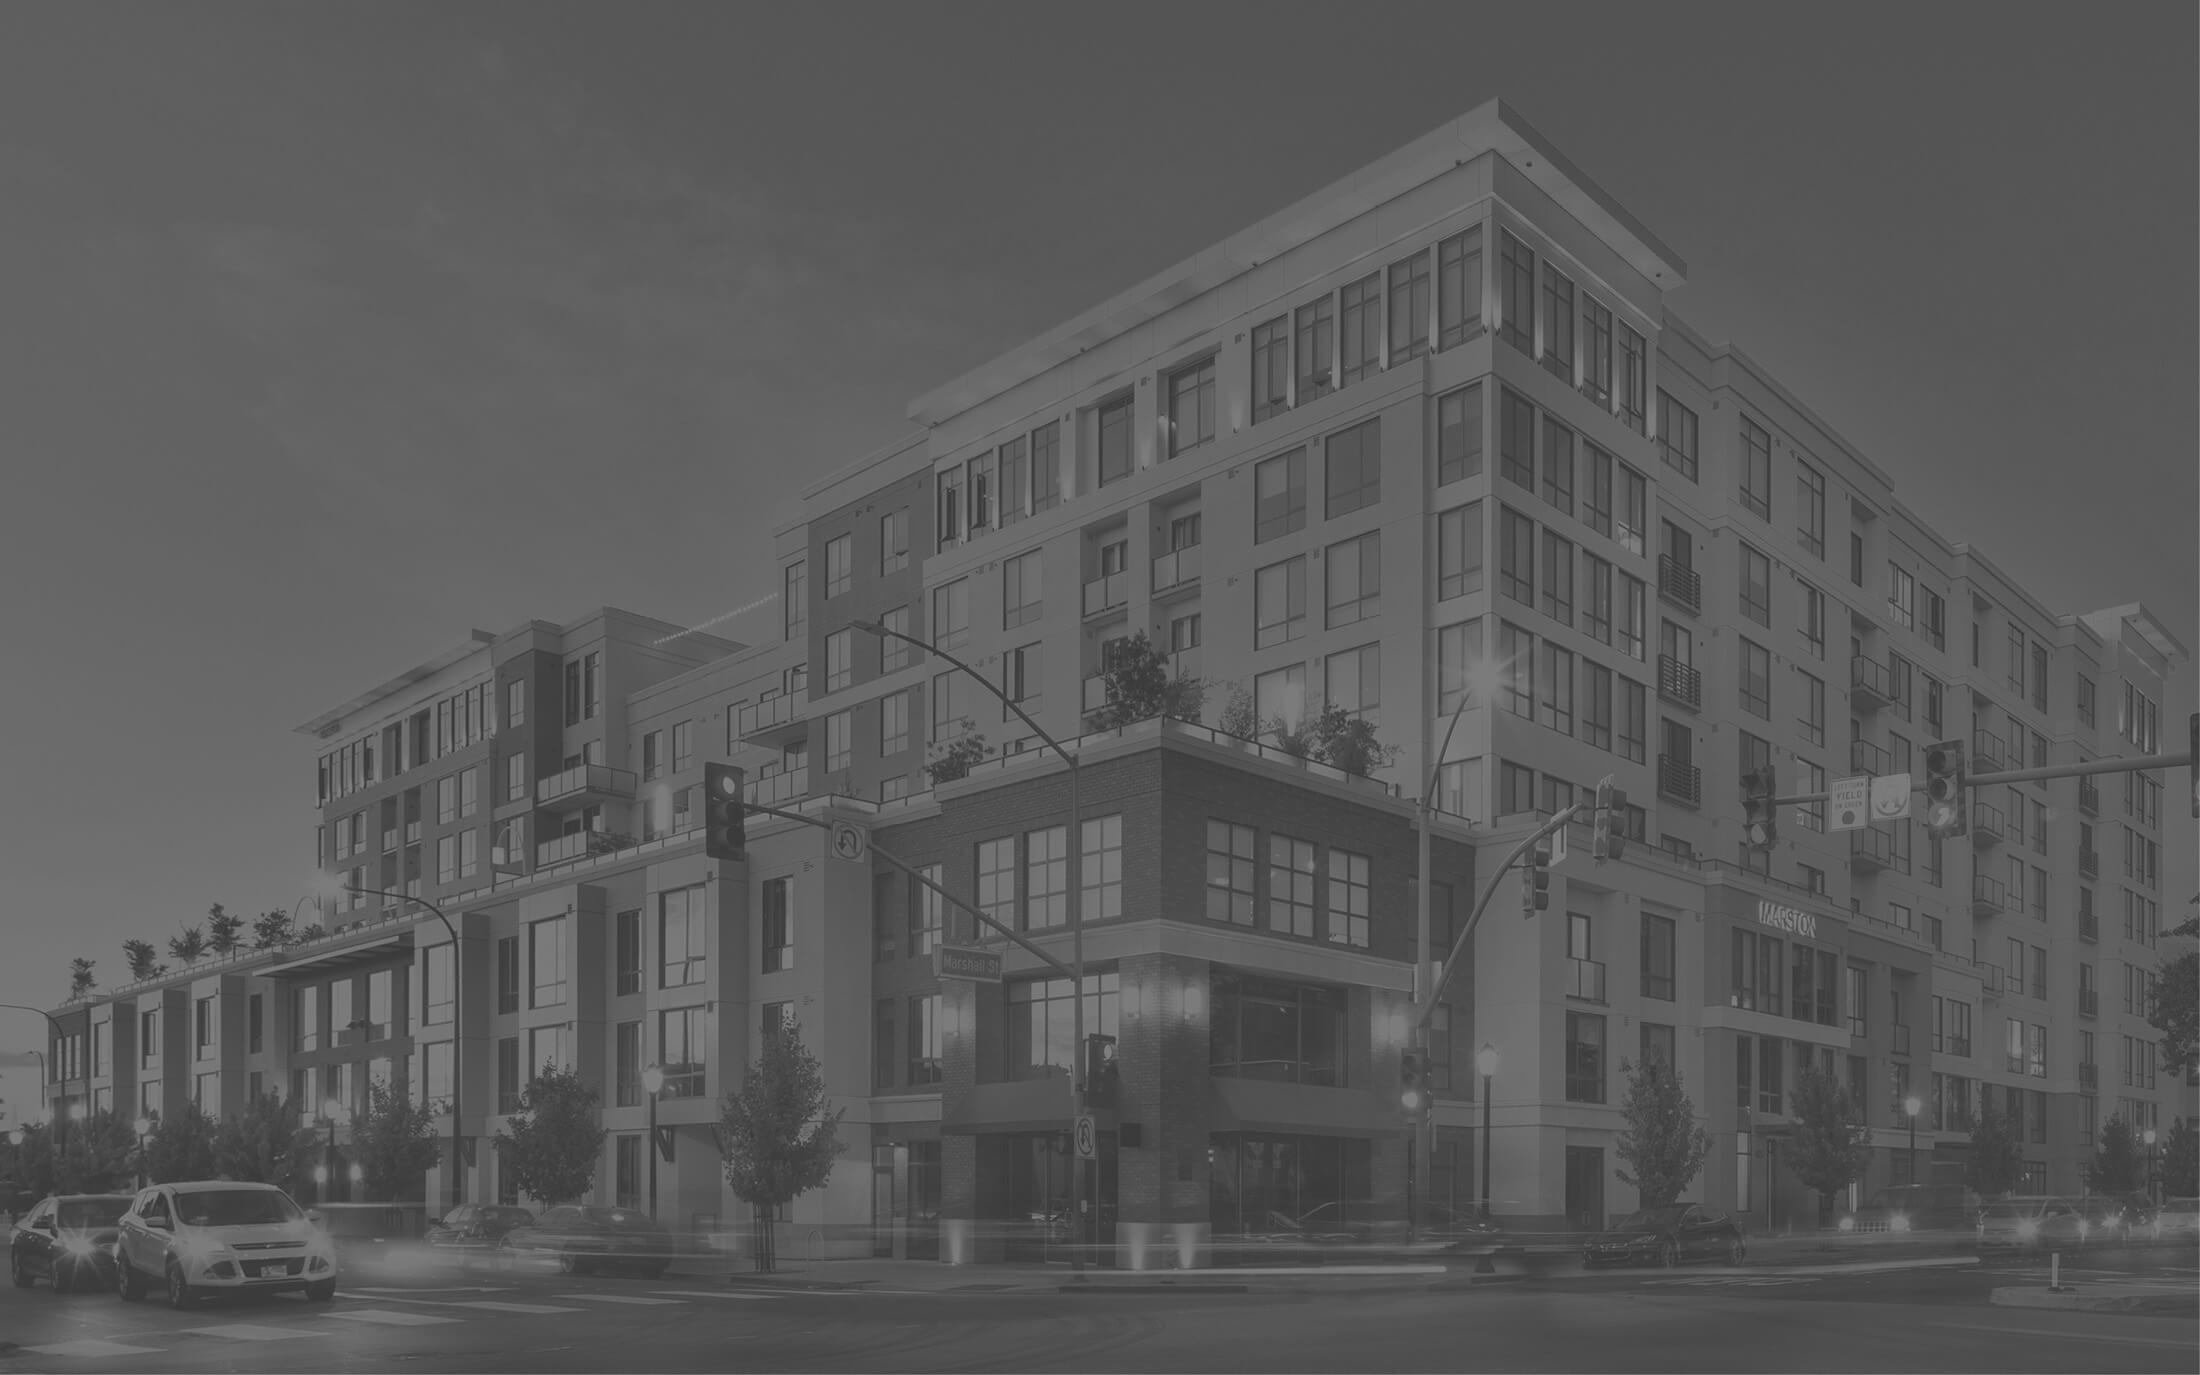 Street view of large apartment buildings with a rooftop patio in black and white